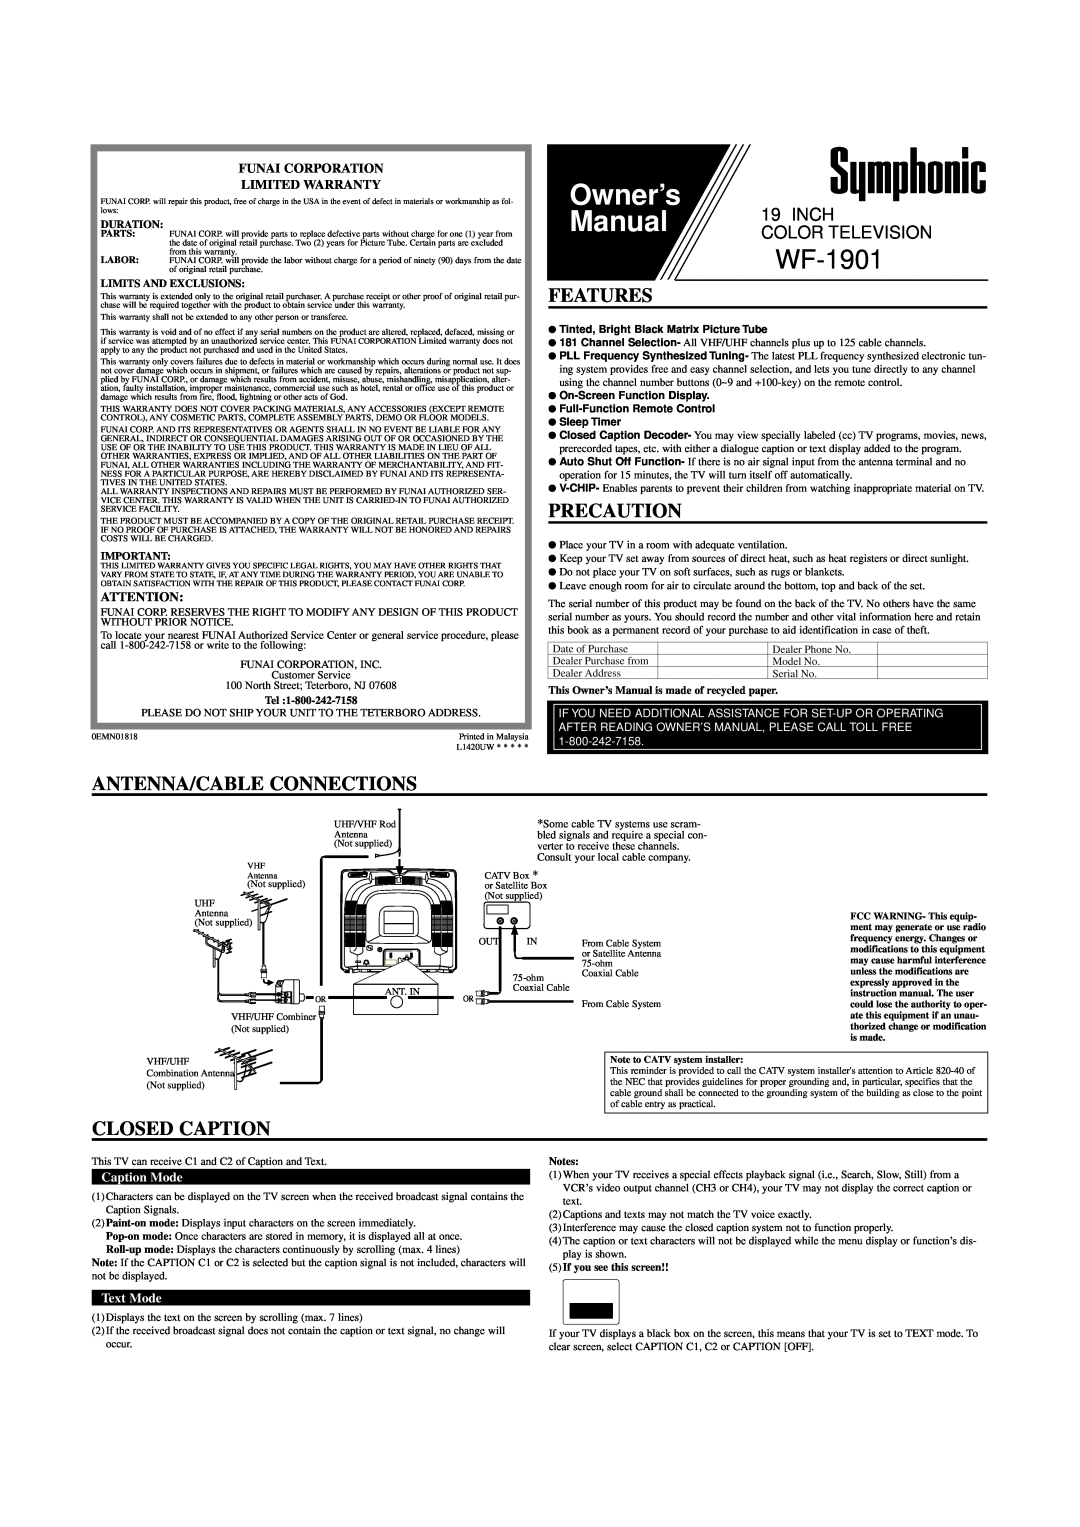 FUNAI WF-1901 owner manual Features, Precaution, Antenna/Cable Connections, Closed Caption, Caption Mode, Text Mode, Inch 